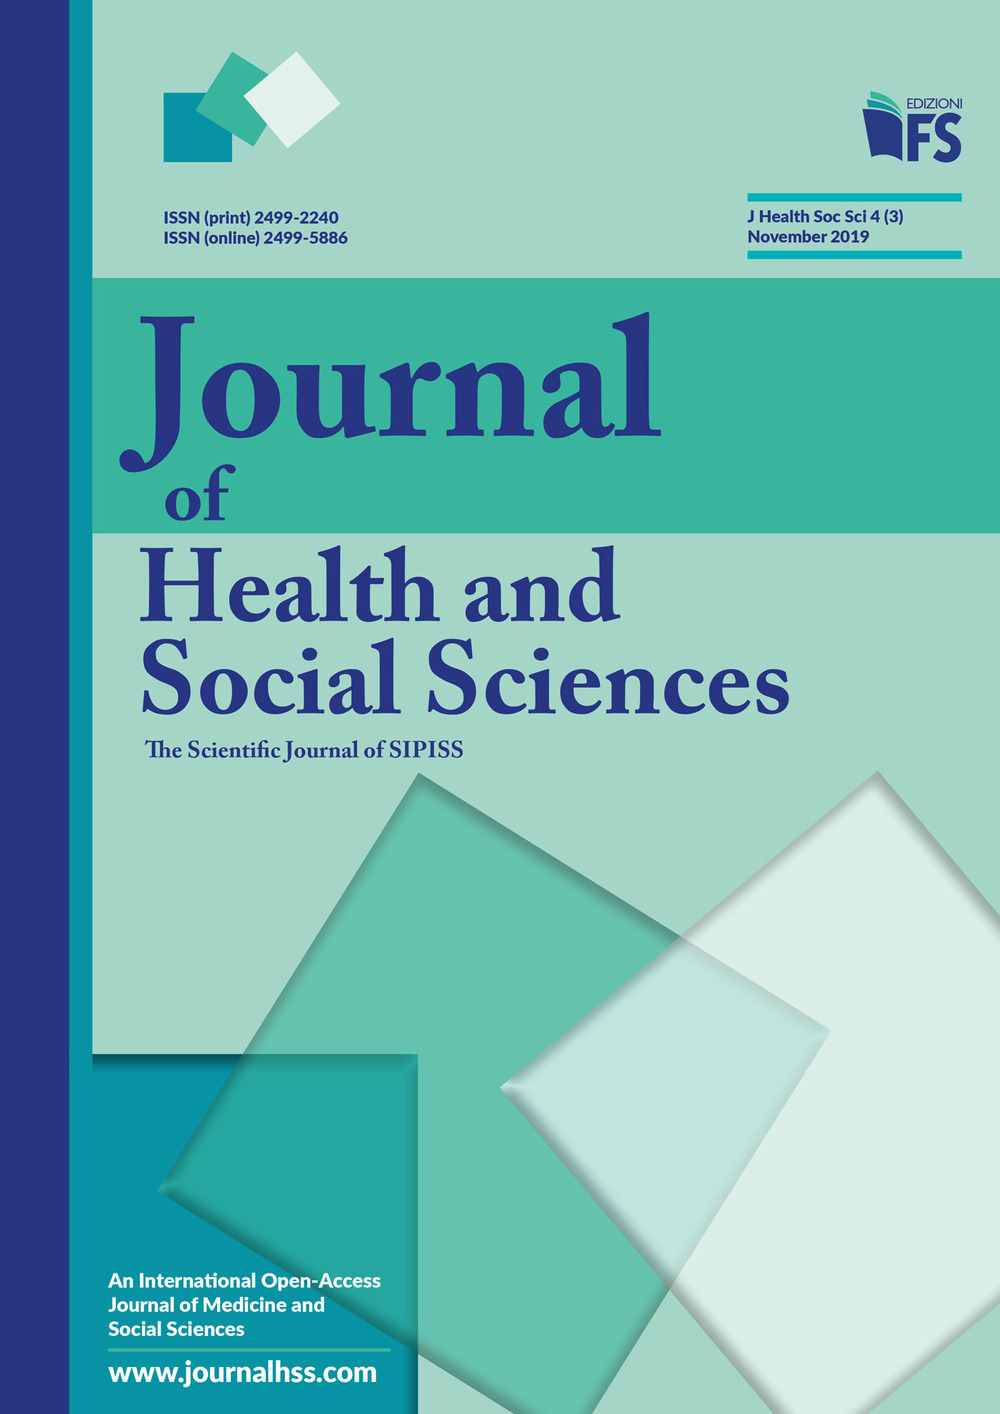 Journal of health and social sciences (2019). Vol. 3: November